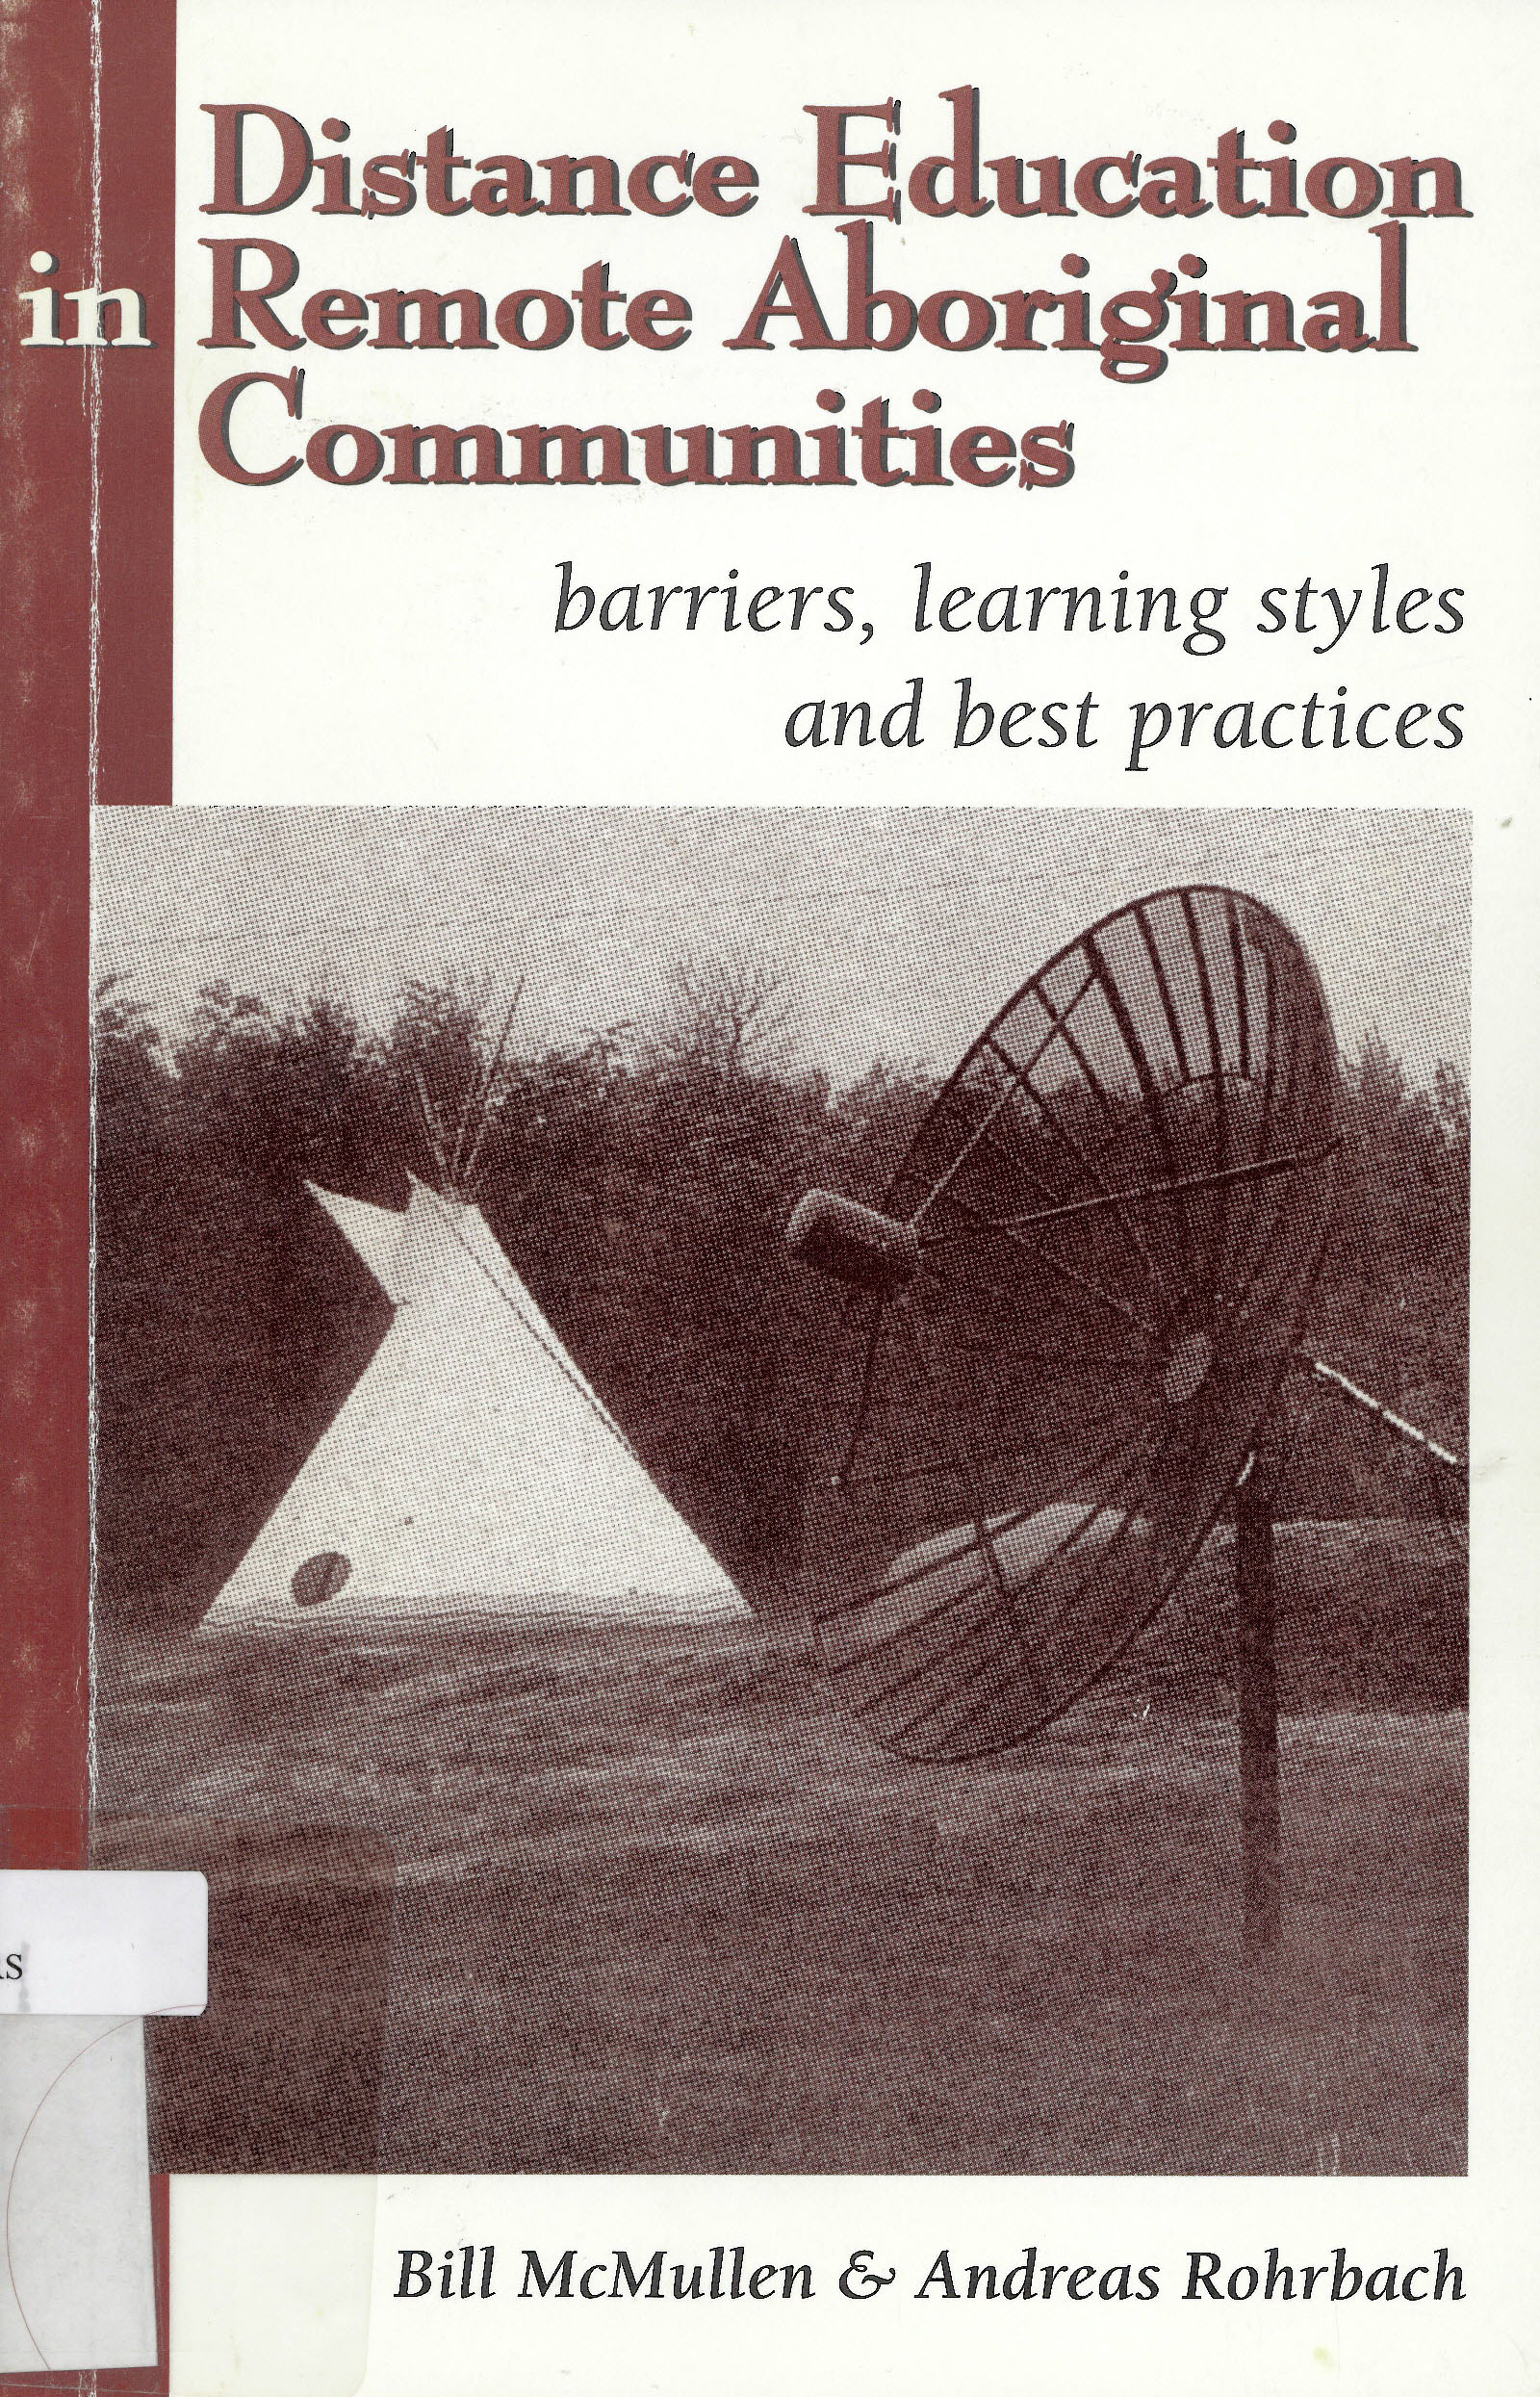 Distance education in remote Aboriginal communities : barriers, learning styles and best practices